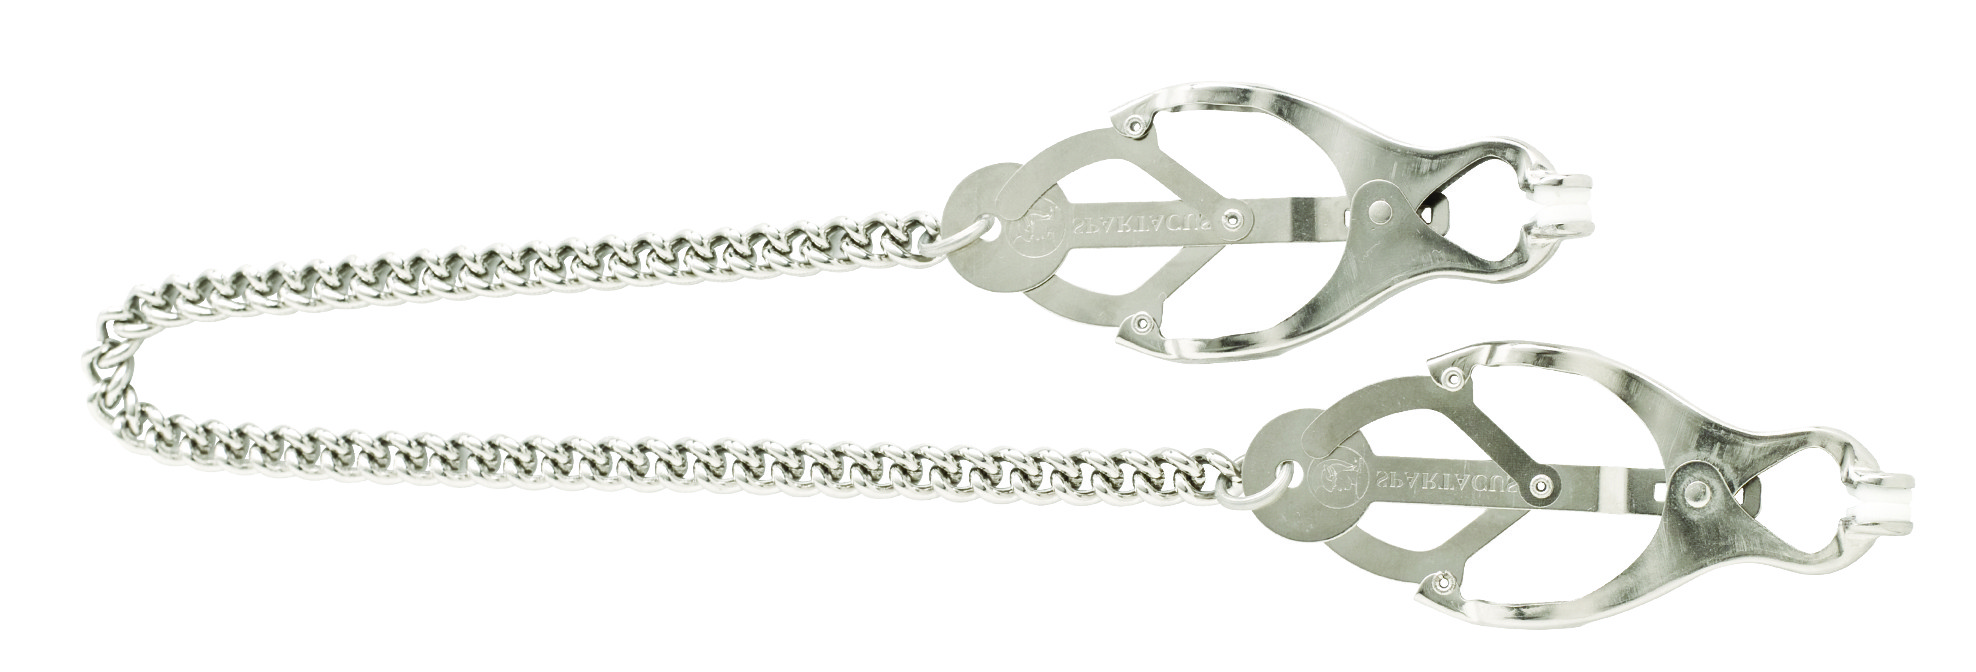 Endurance Butterfly Clamps - Link Chain